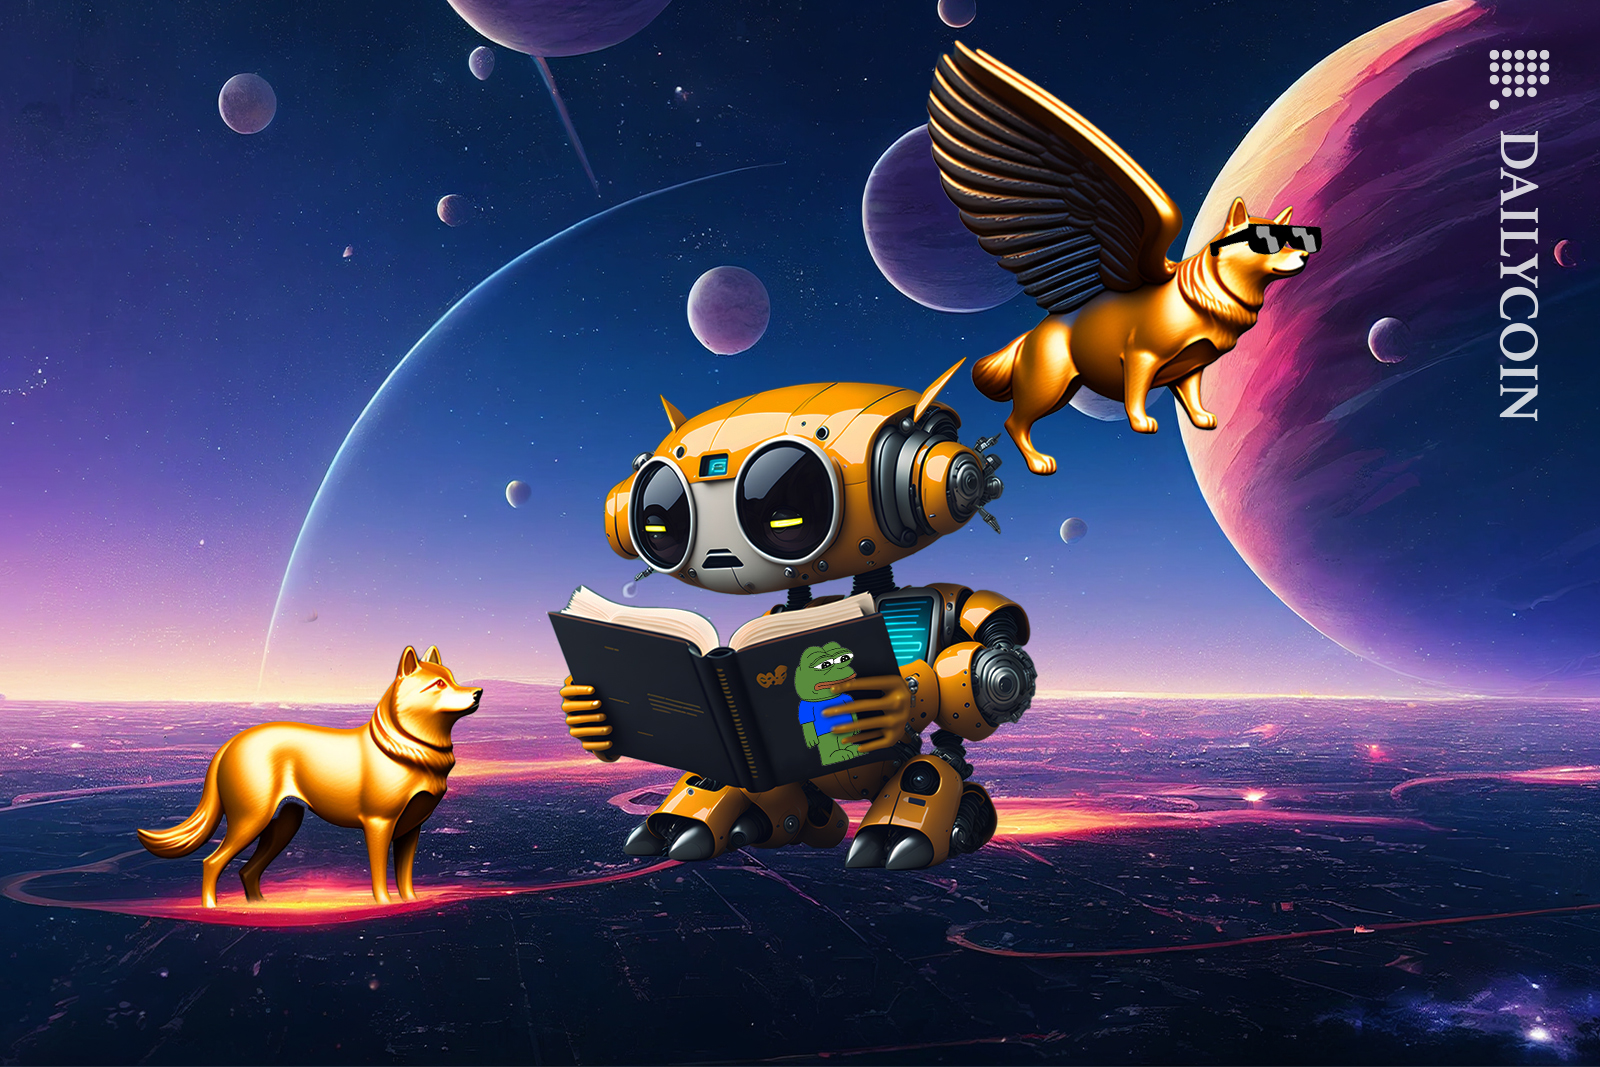 Robot in an alien planet is reading a story of Pepe to a Shiba Inu while a Doge with wings is flying off.